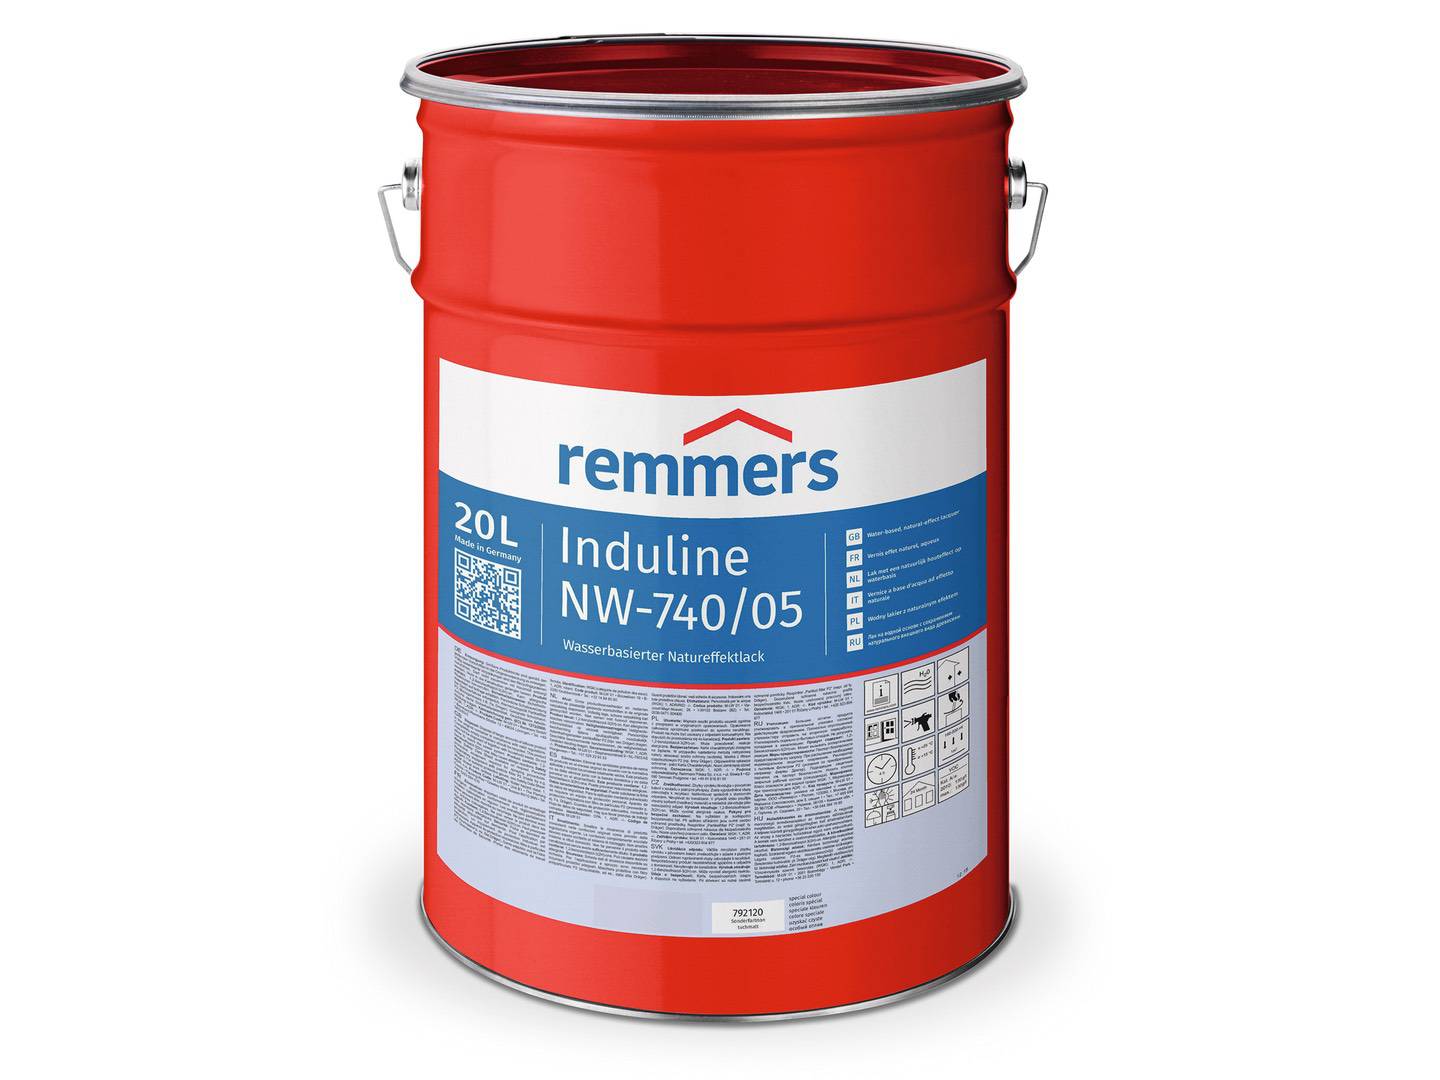 REMMERS Induline NW-740/05 farblos 20 l